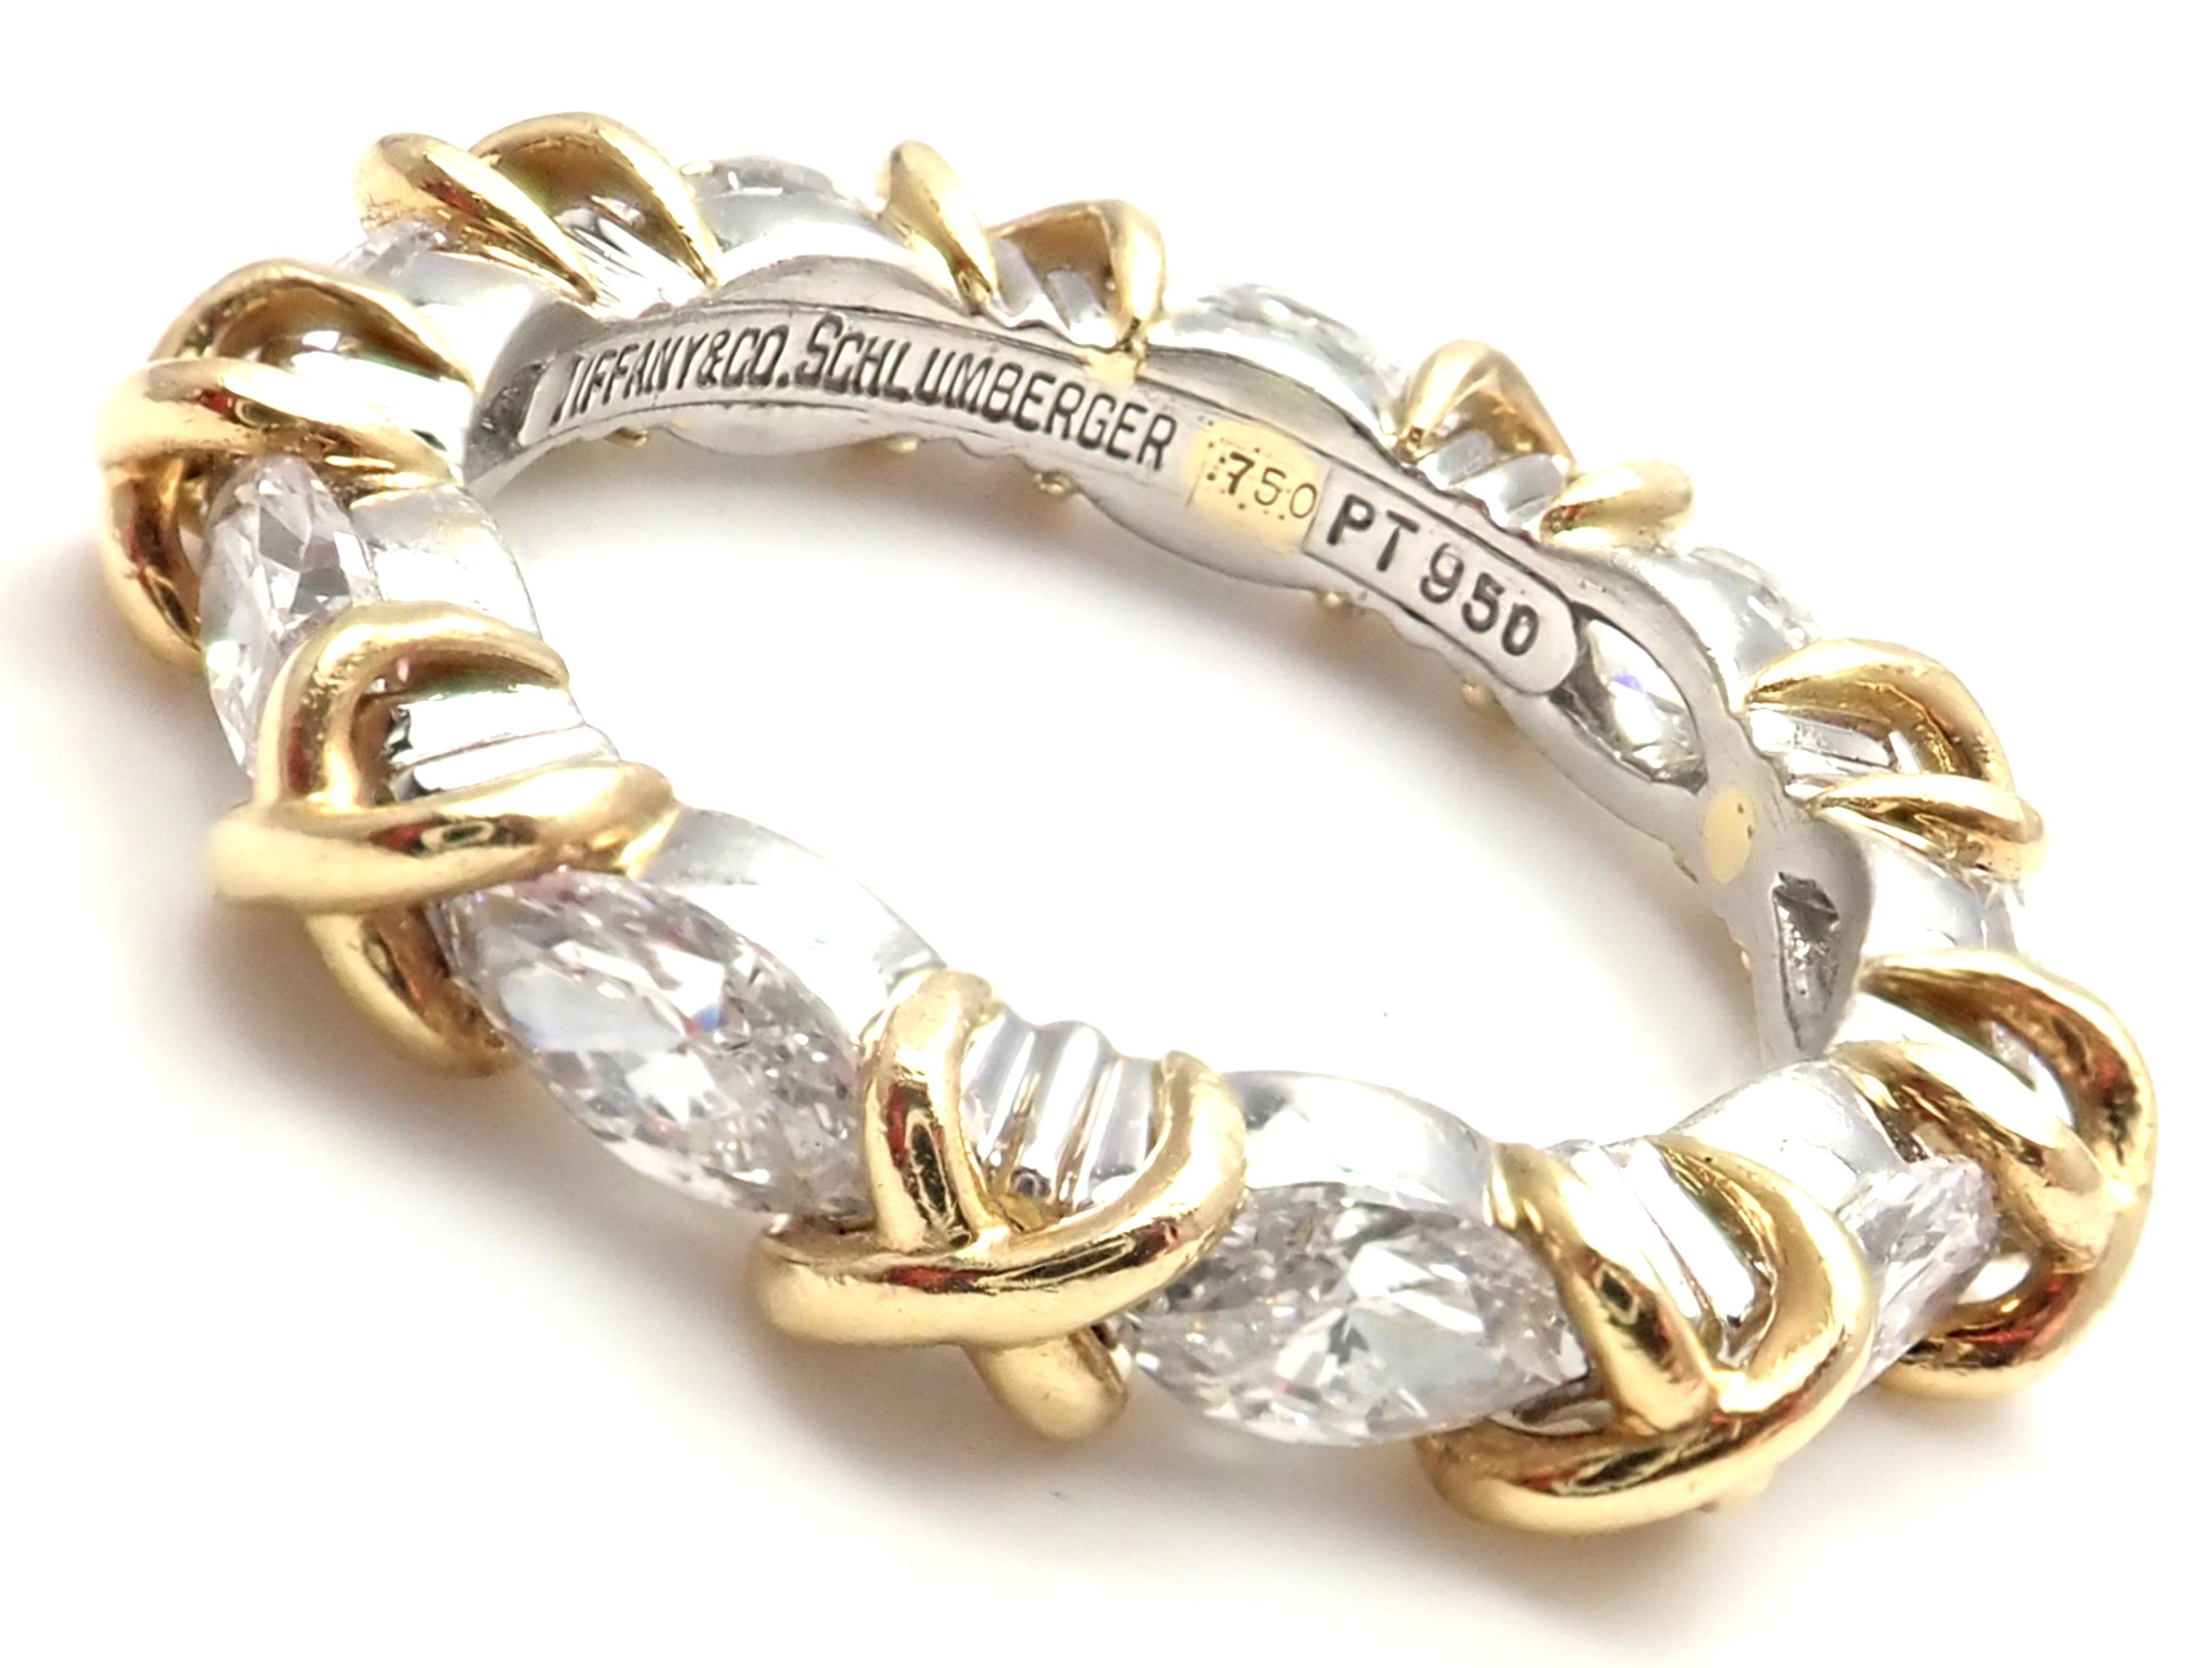 18k Yellow Gold & Platinum Diamond Jean Schlumberger Band Ring designed for Tiffany & Co. 
With 9 Marque Cut Diamonds VVS1-VS2 clarity, F-G color, Total weight Approx 1.48ct
This ring comes with Tiffany & Co paper.
Details:
Ring Size: 7
Weight: 7